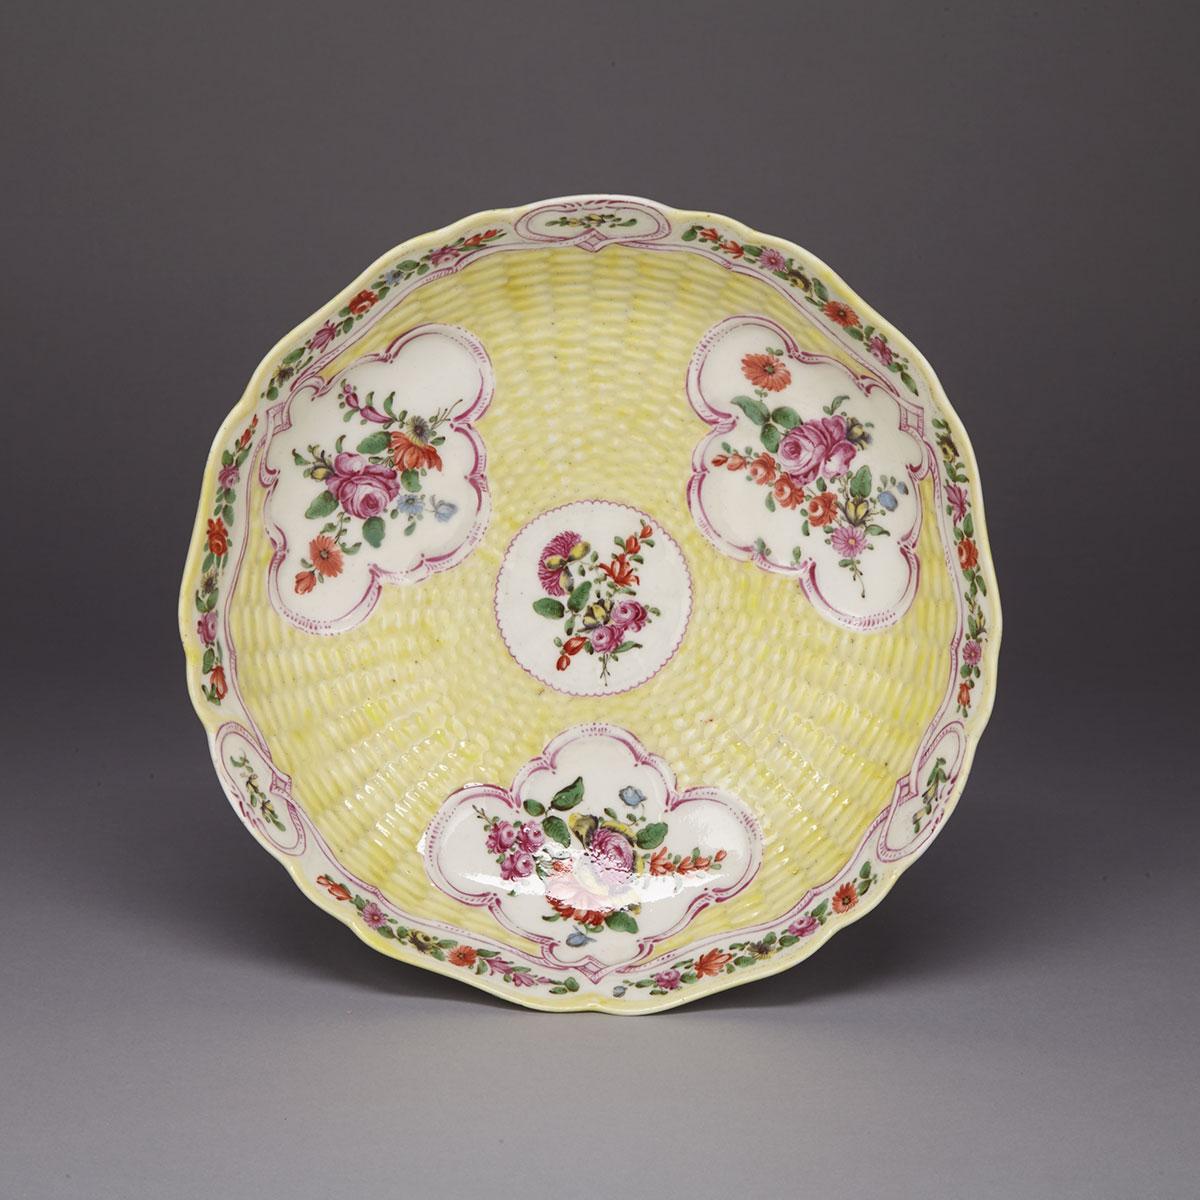 Worcester Yellow Ground Moulded Basketweave Junket Dish, c.1765-70